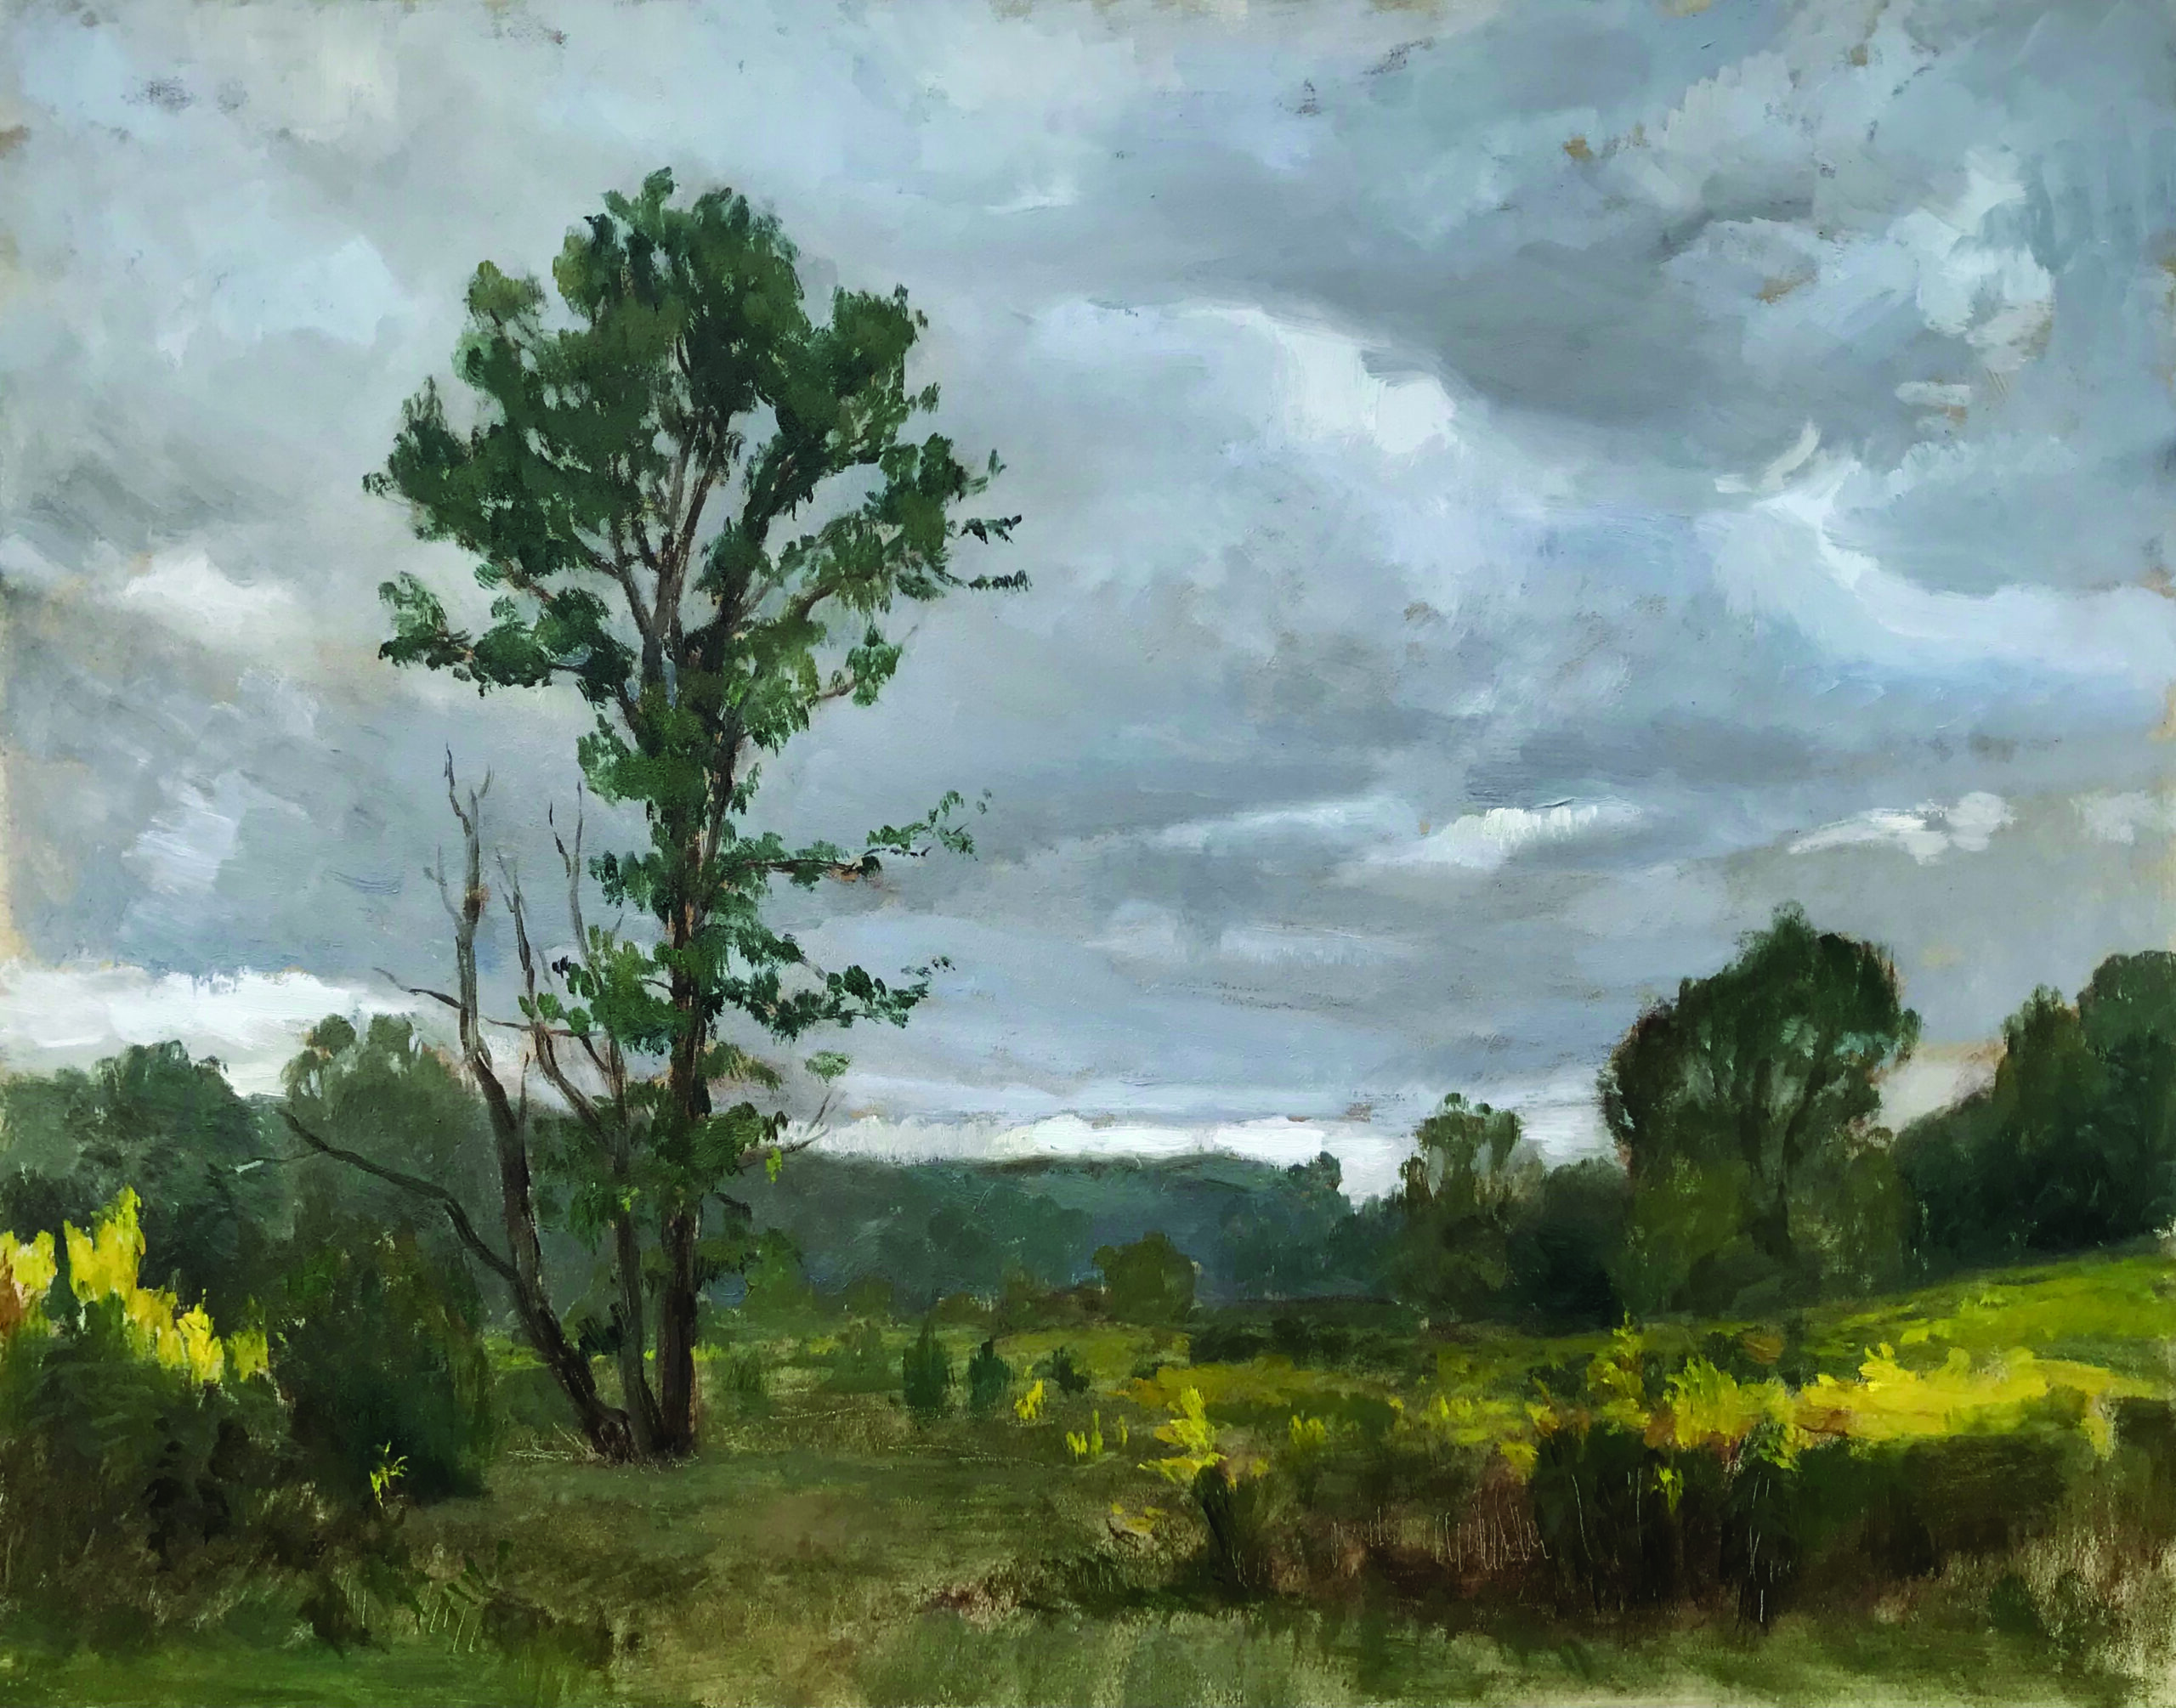 Mary Jane Ward, “Overcast Skies at Highbanks,” 2021, oil, 11 x 14 in., Collection the artist, Plein air